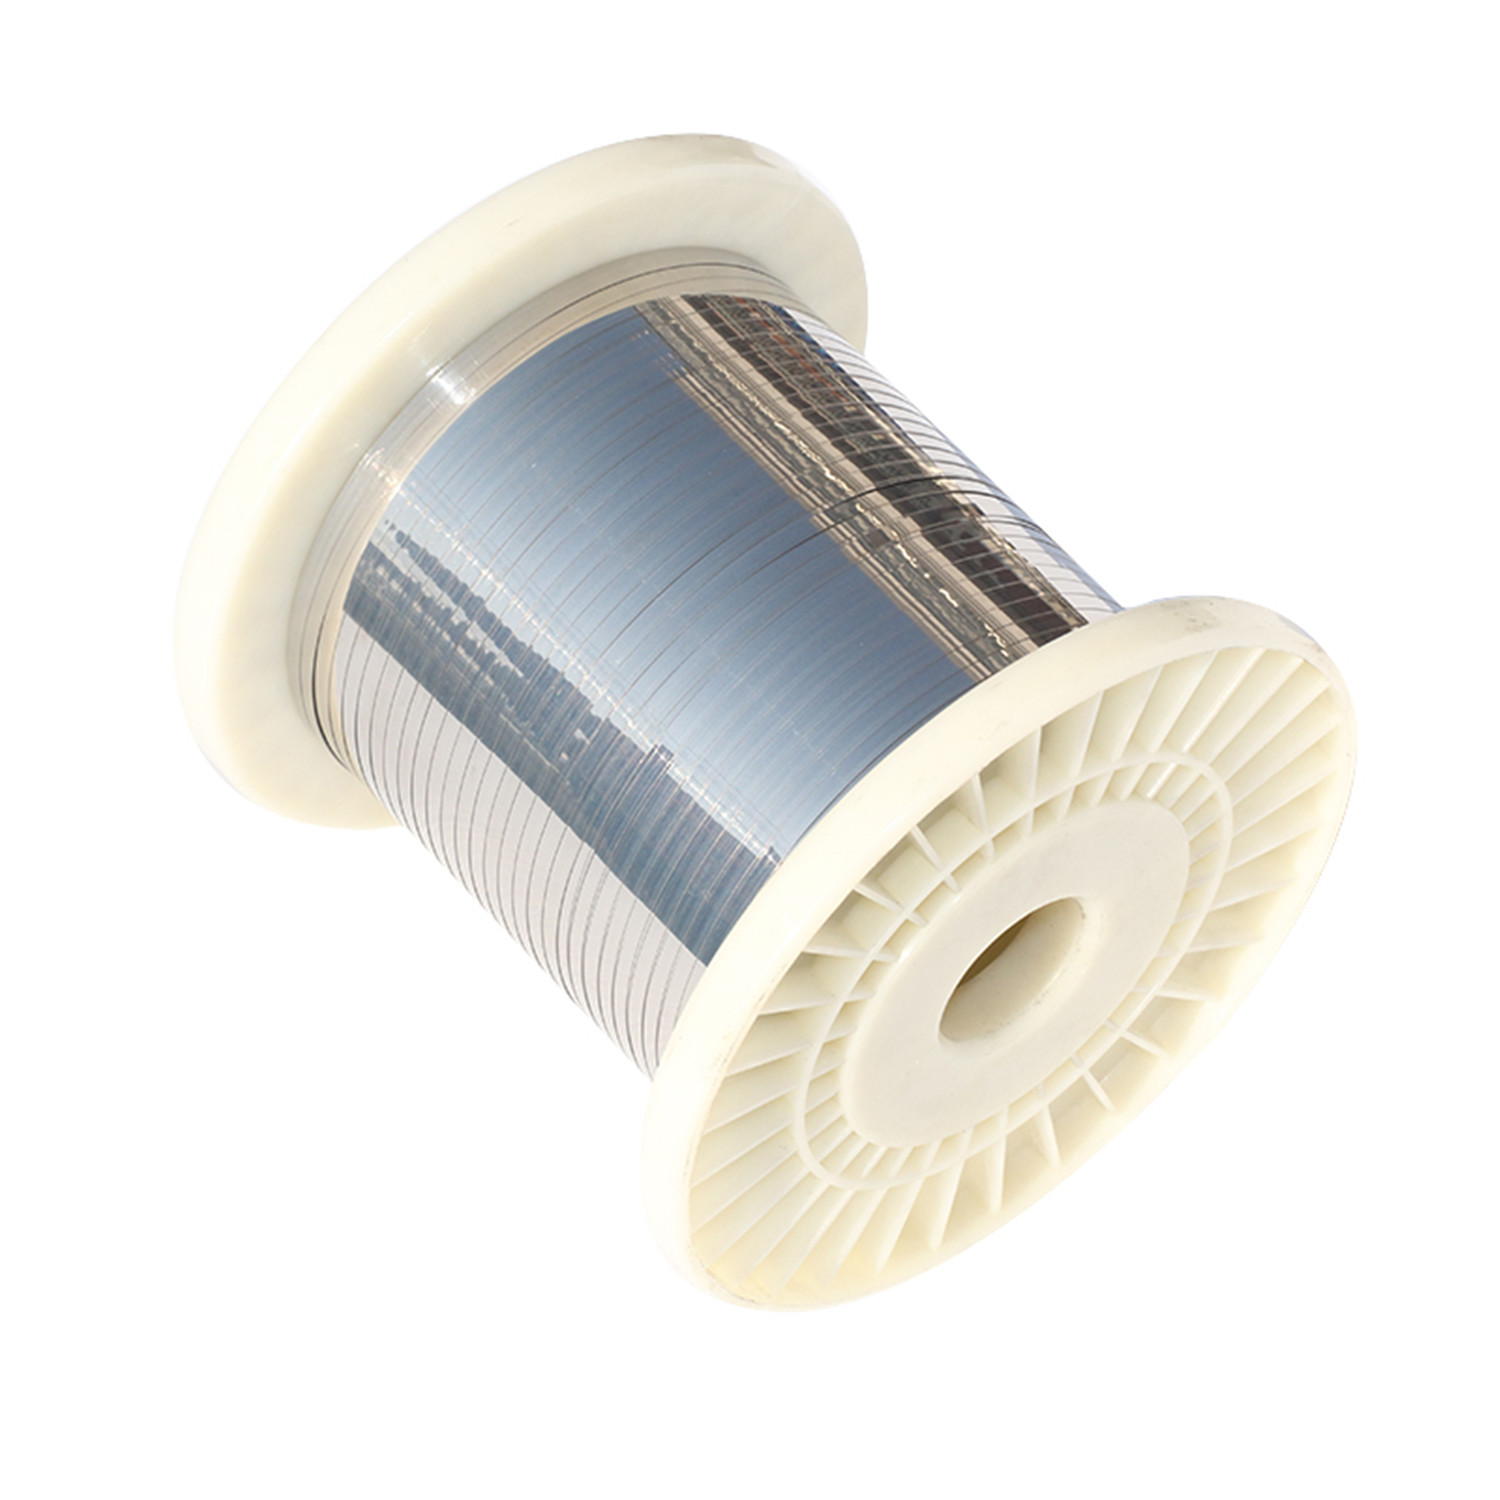 China NiCr3020 Electrical Resistance Wire NiCr3520 20 Gauge 32 Gauge Nichrome Wire factory